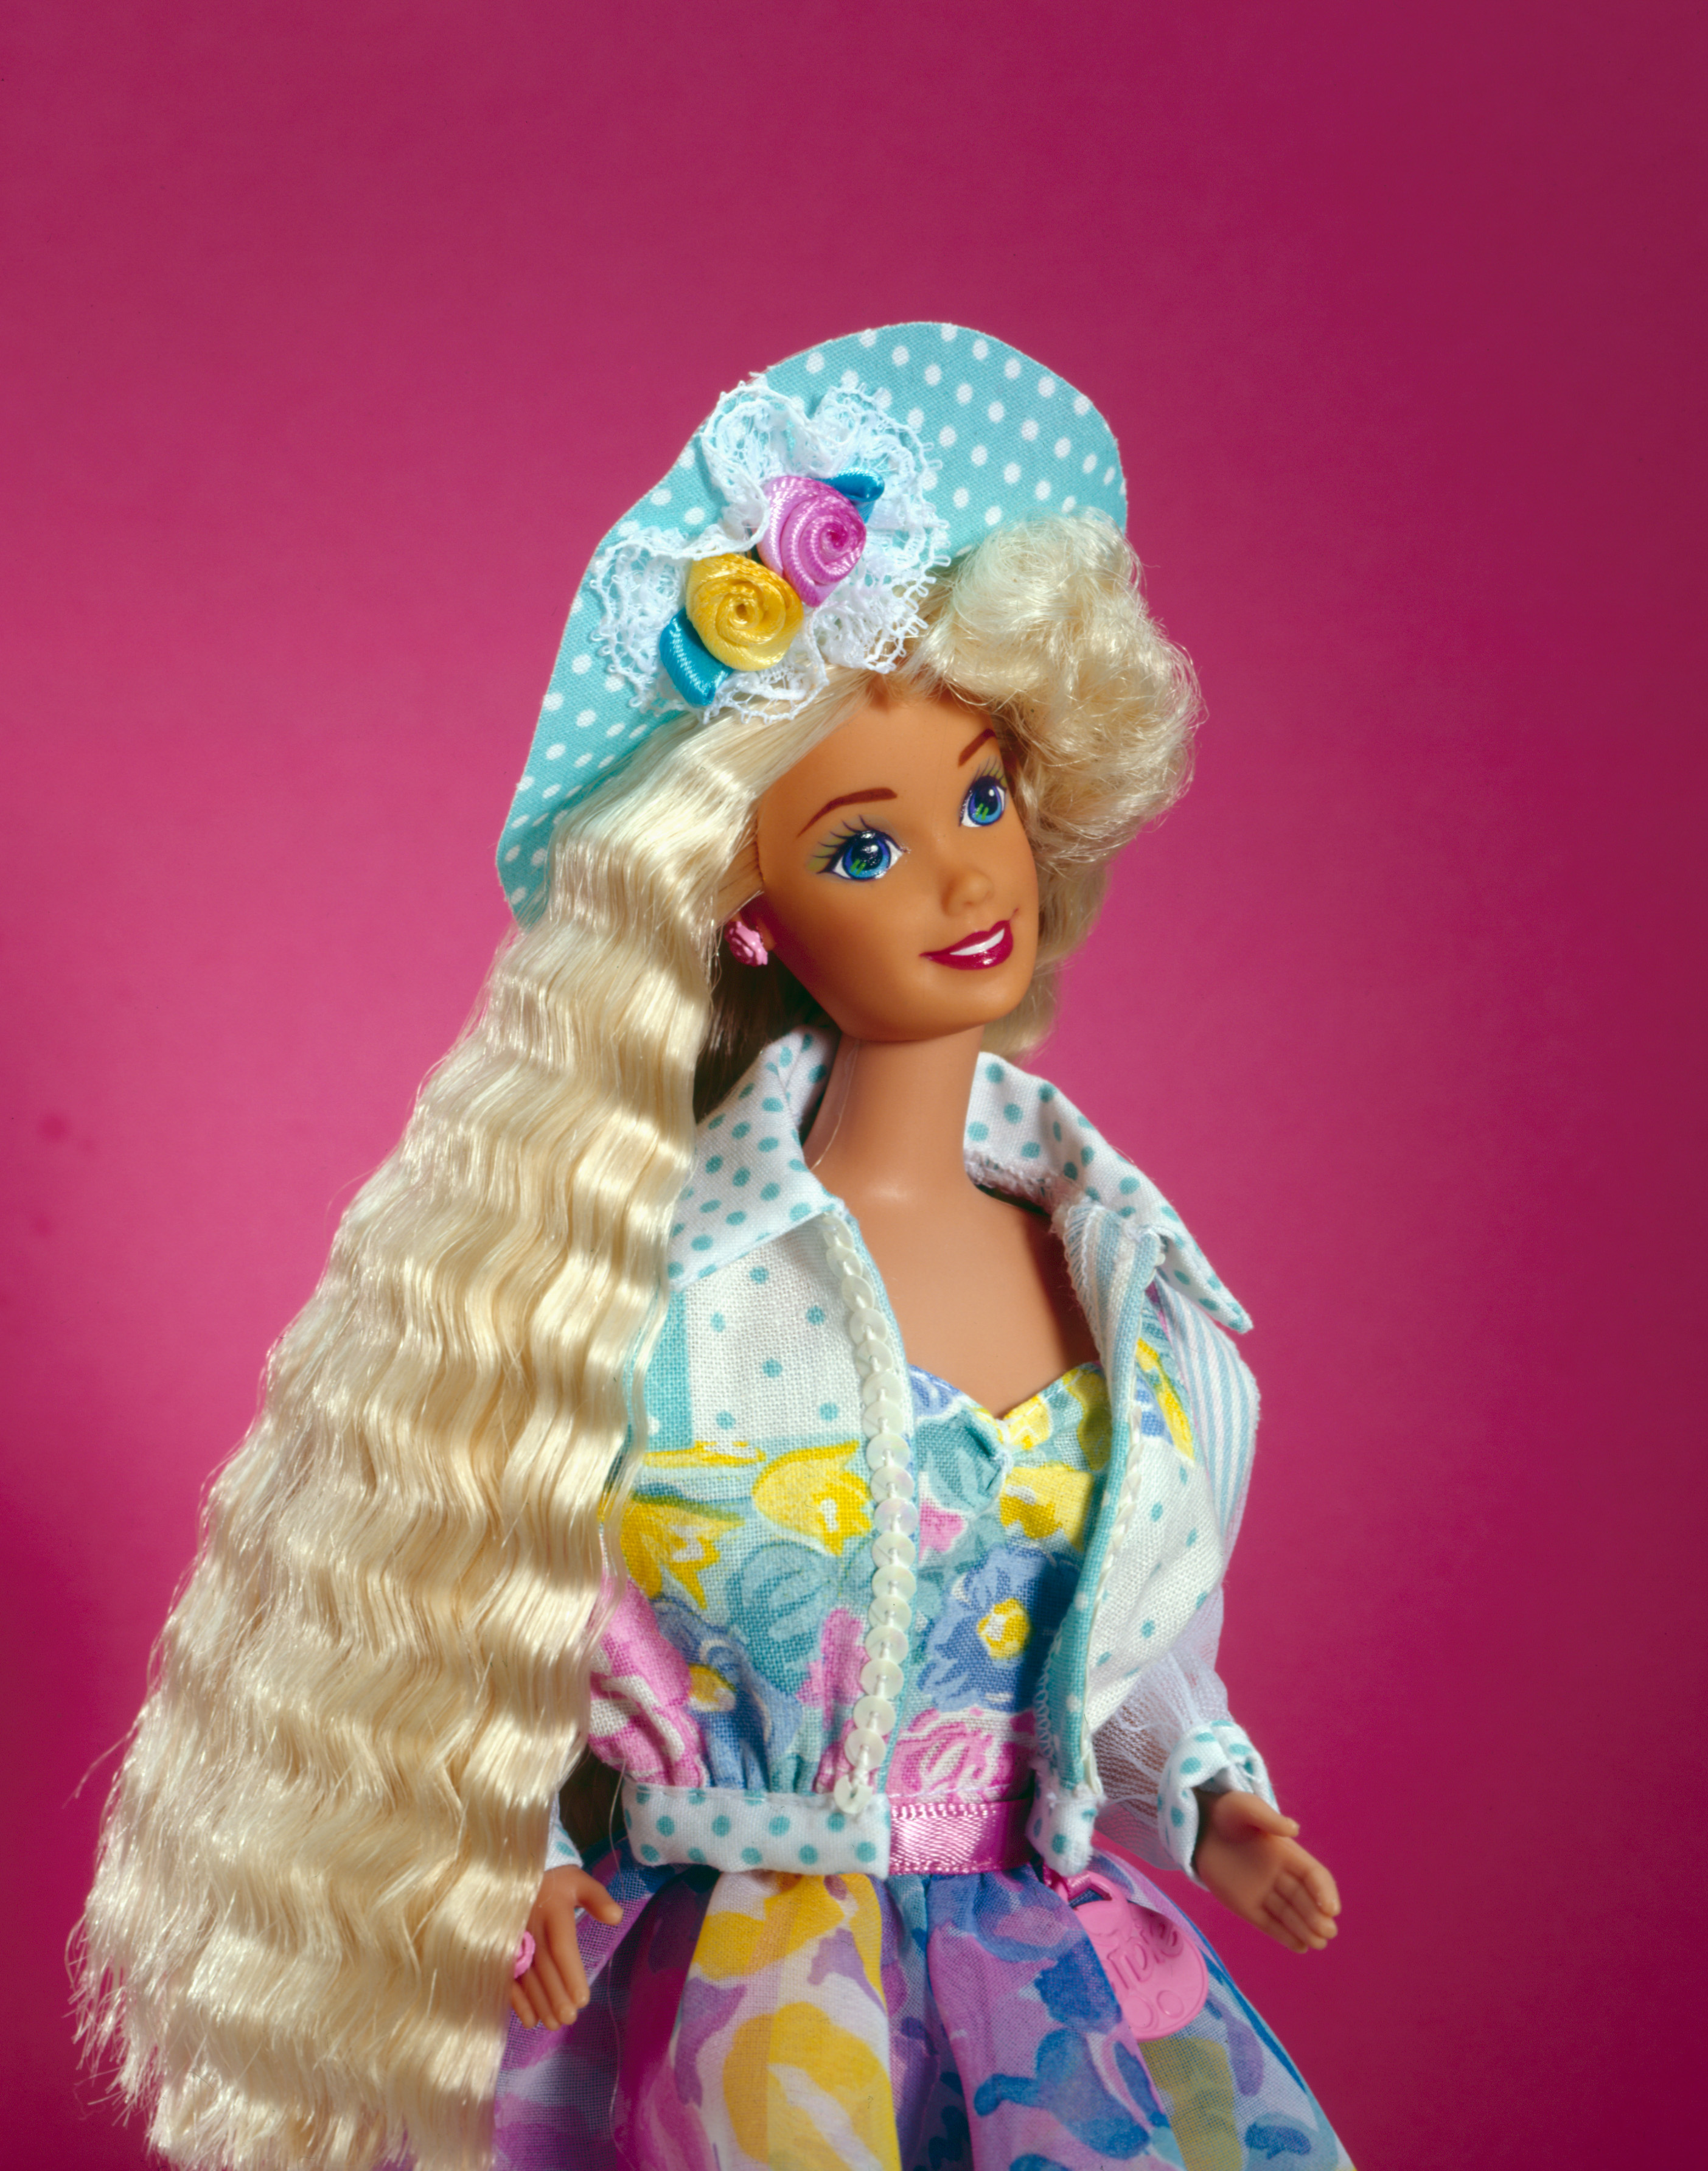 The Barbie Premier Has Nothing On Our Top 5 Texas Barbies!